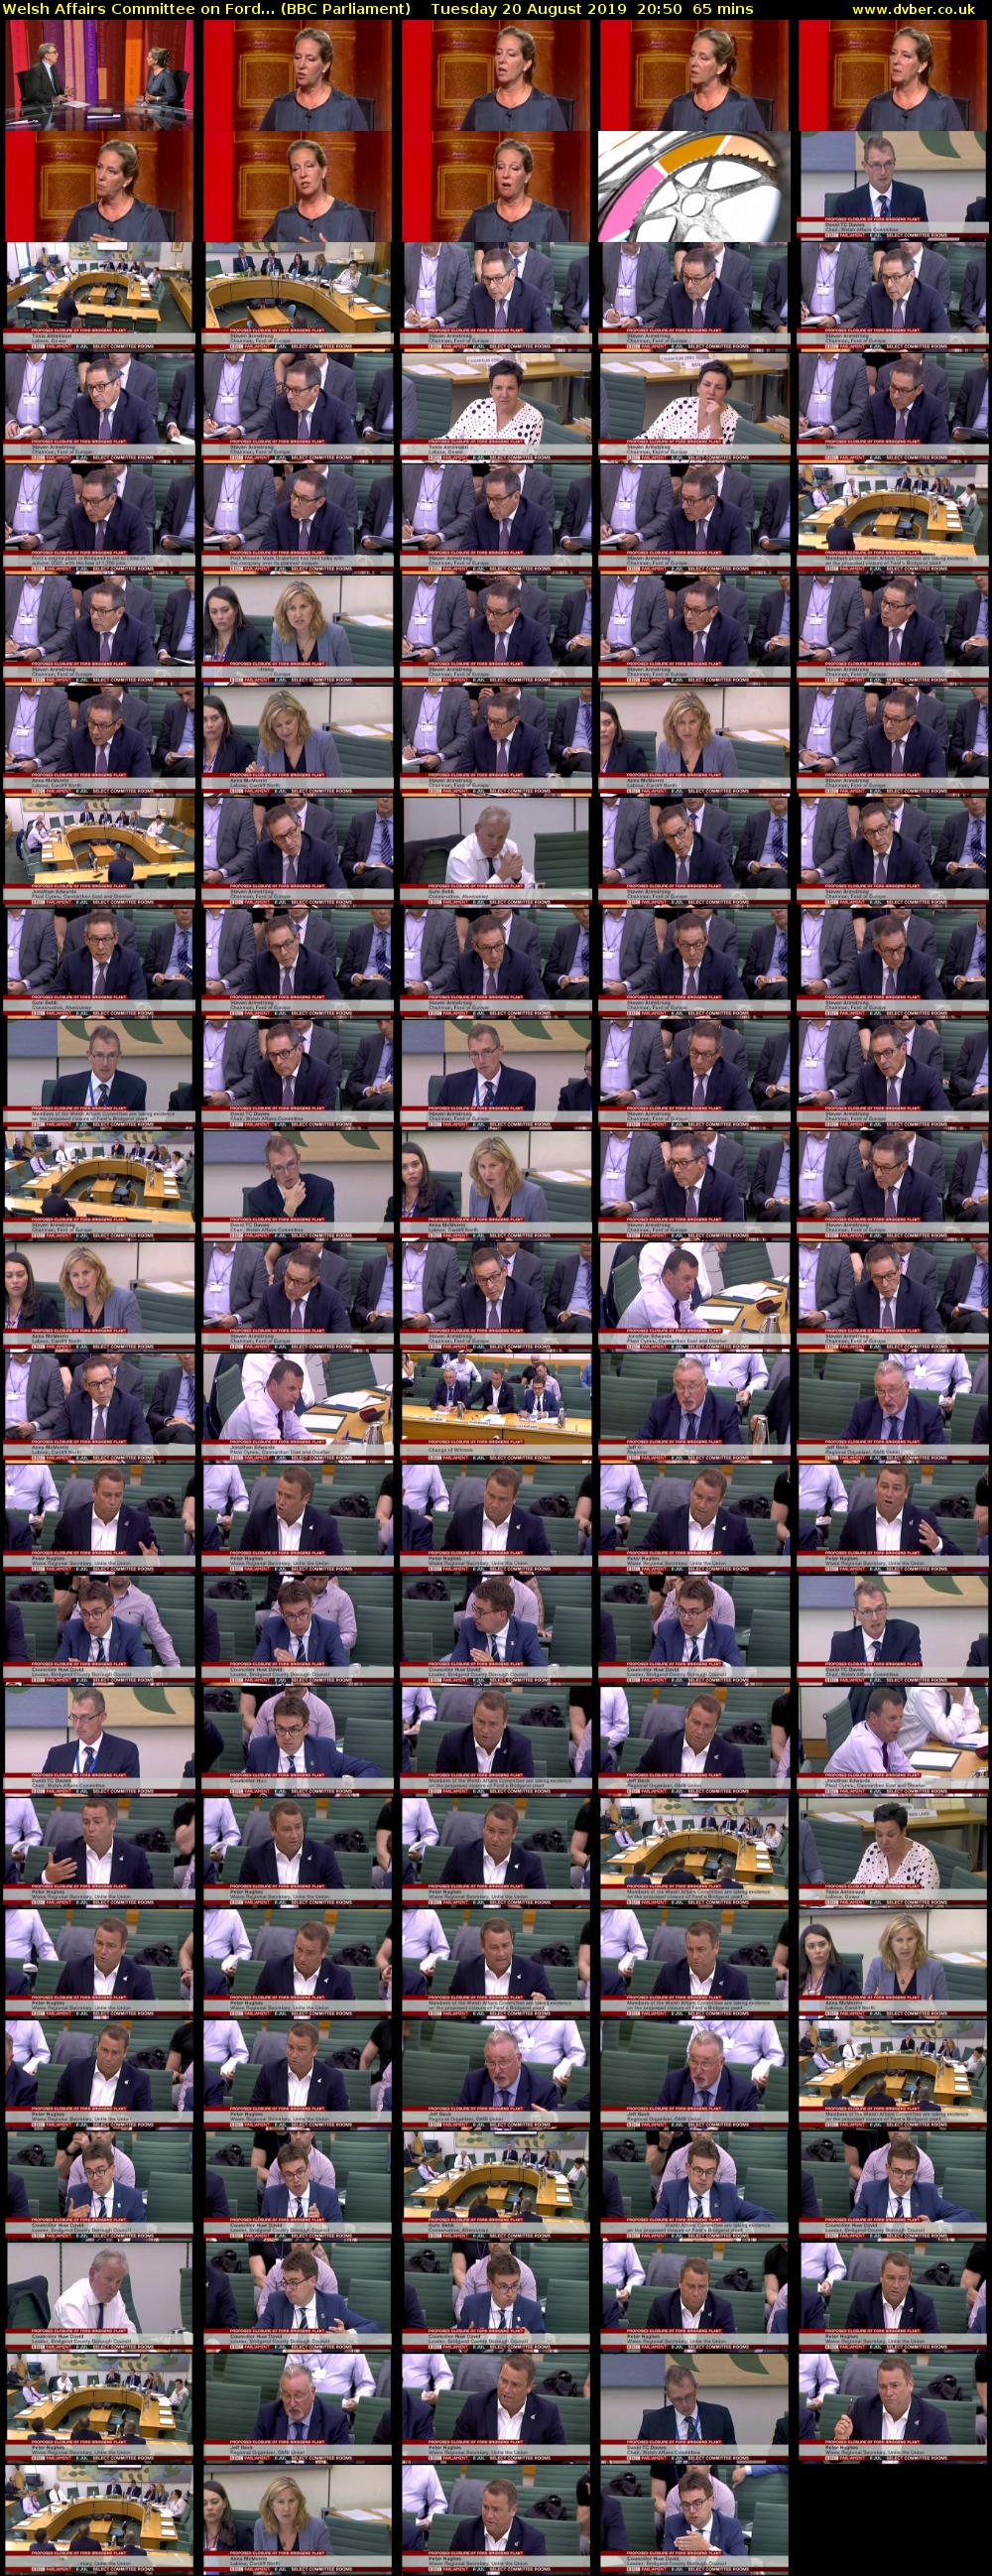 Welsh Affairs Committee on Ford... (BBC Parliament) Tuesday 20 August 2019 20:50 - 21:55